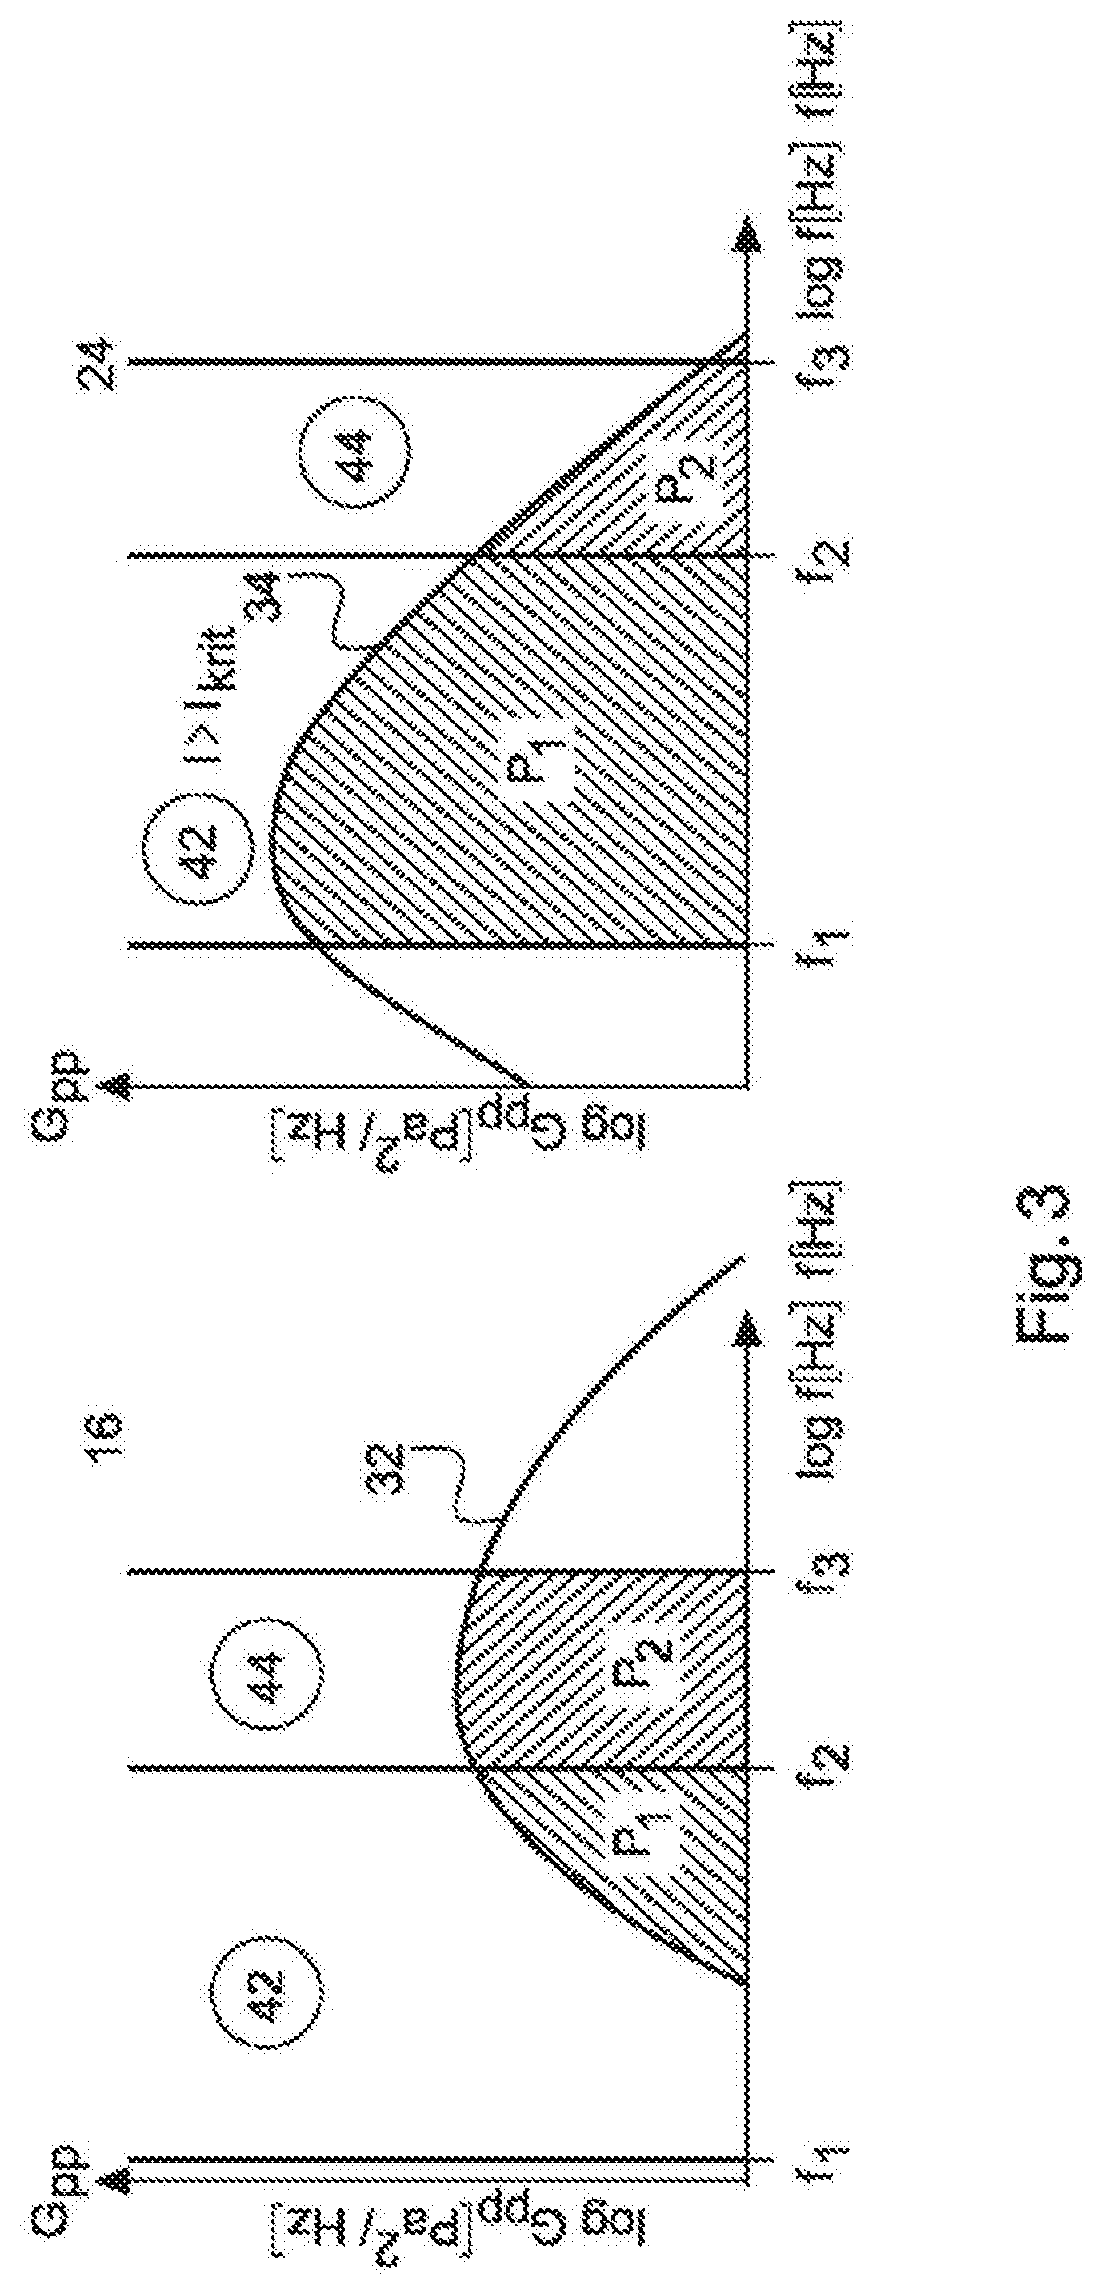 Method for evaluating an inflow on a rotor blade of a wind turbine, method for controlling a wind turbine, and a wind turbine